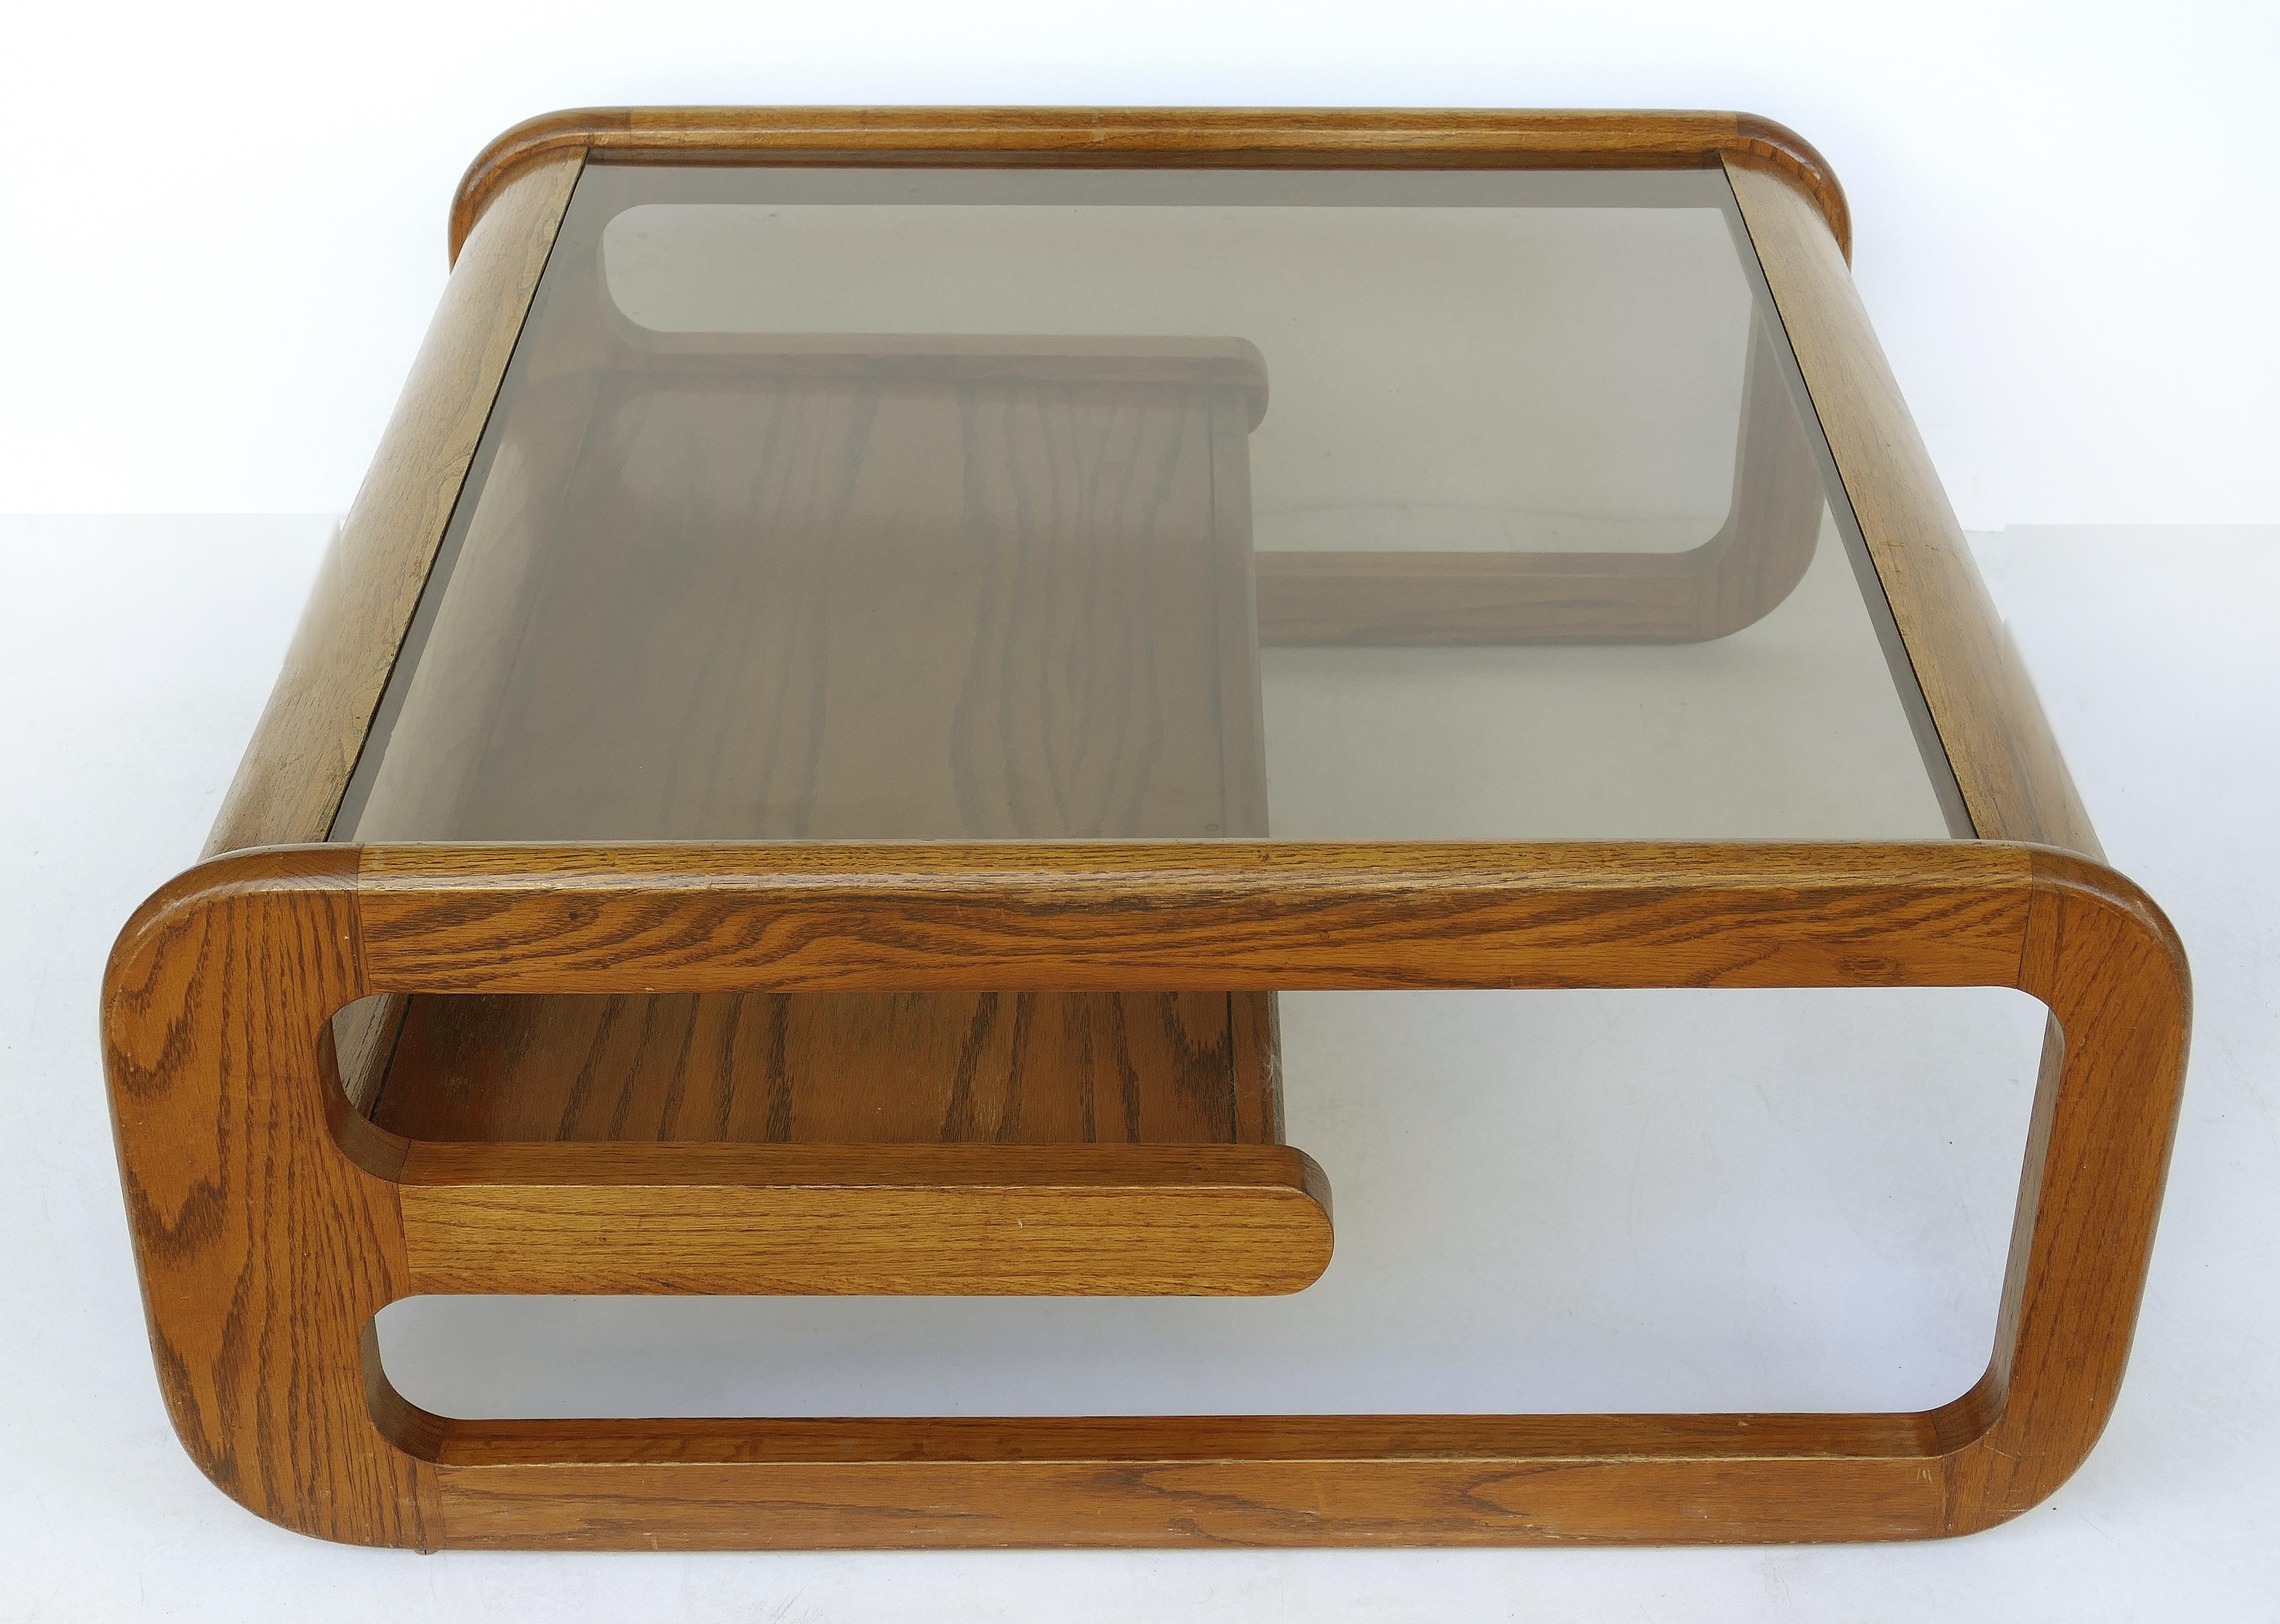 Lou Hodges Mid-Century Modern California coffee table with inset glass

Offered for sale is a Lou Hodges (1937-2003) Mid-Century Modern two-tiered California coffee table with inset glass top. Lou Hodges was an important figure in the history of